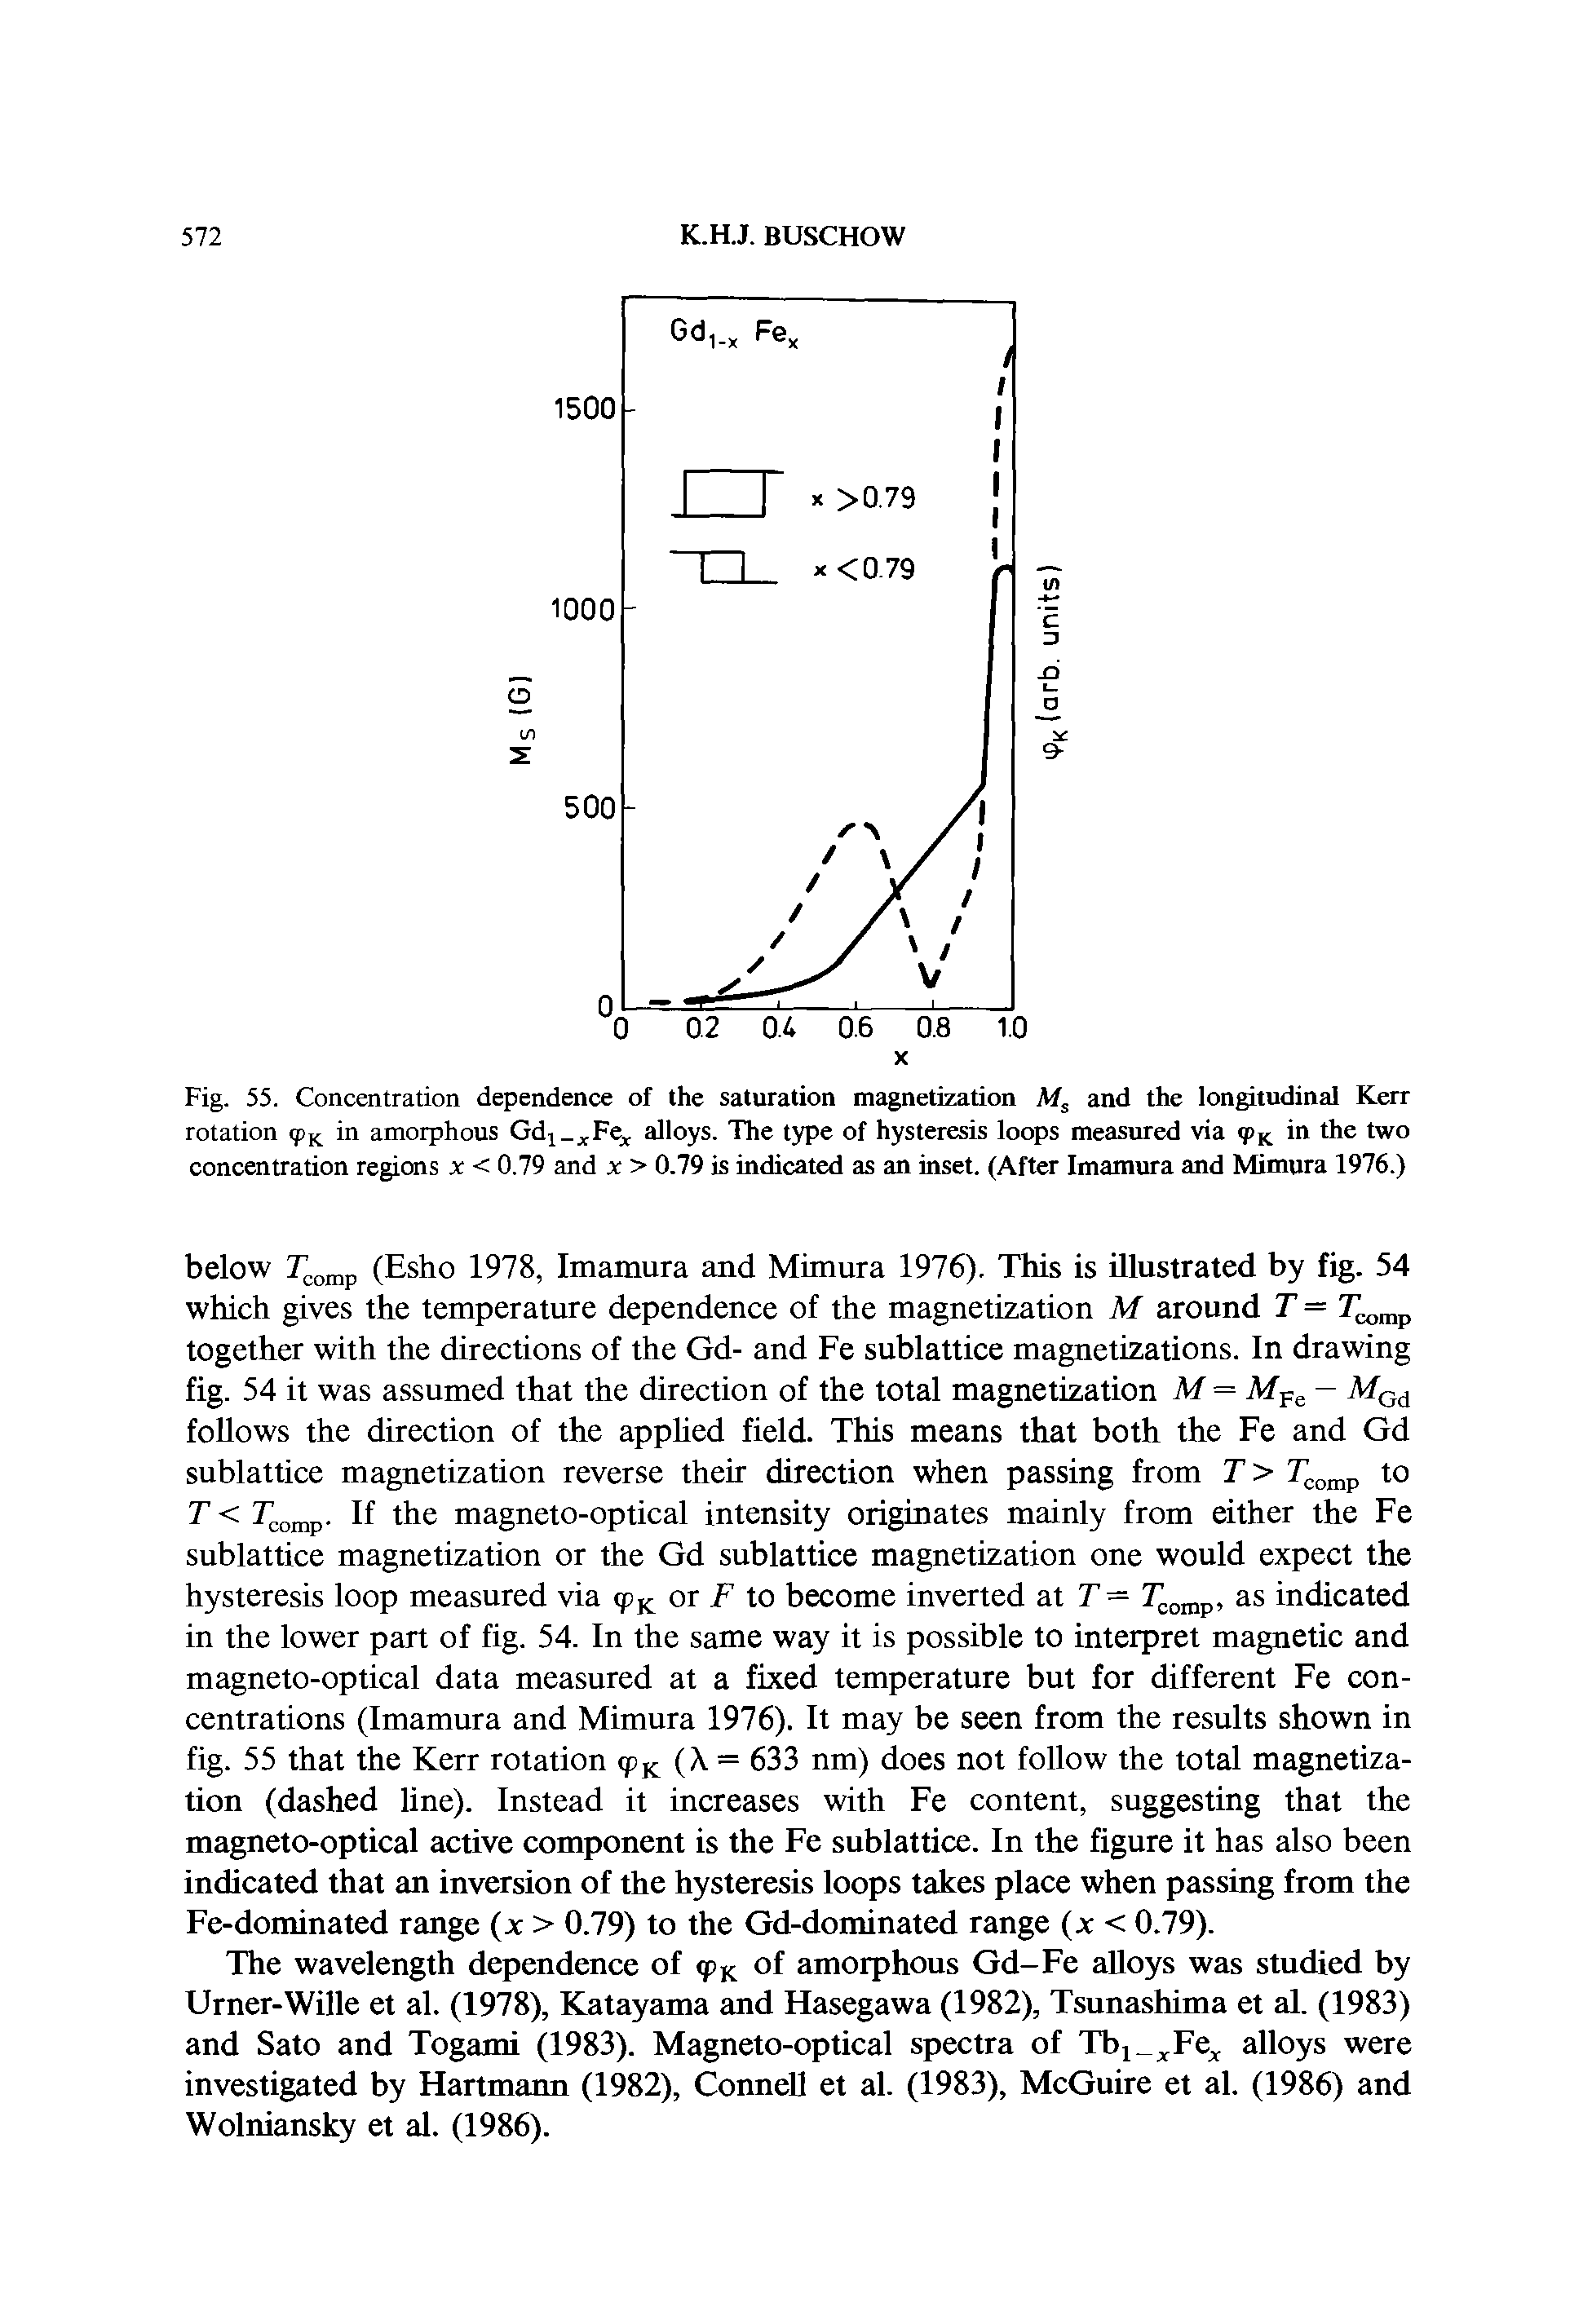 Fig. 55. Concentration dependence of the saturation magnetization Ms and the longitudinal Kerr rotation <pK in amorphous Gdj. Fe,. alloys. The type of hysteresis loops measured via <pK in the two concentration regions x < 0.79 and x > 0.79 is indicated as an inset. (After Imamura and Mimura 1976.)...